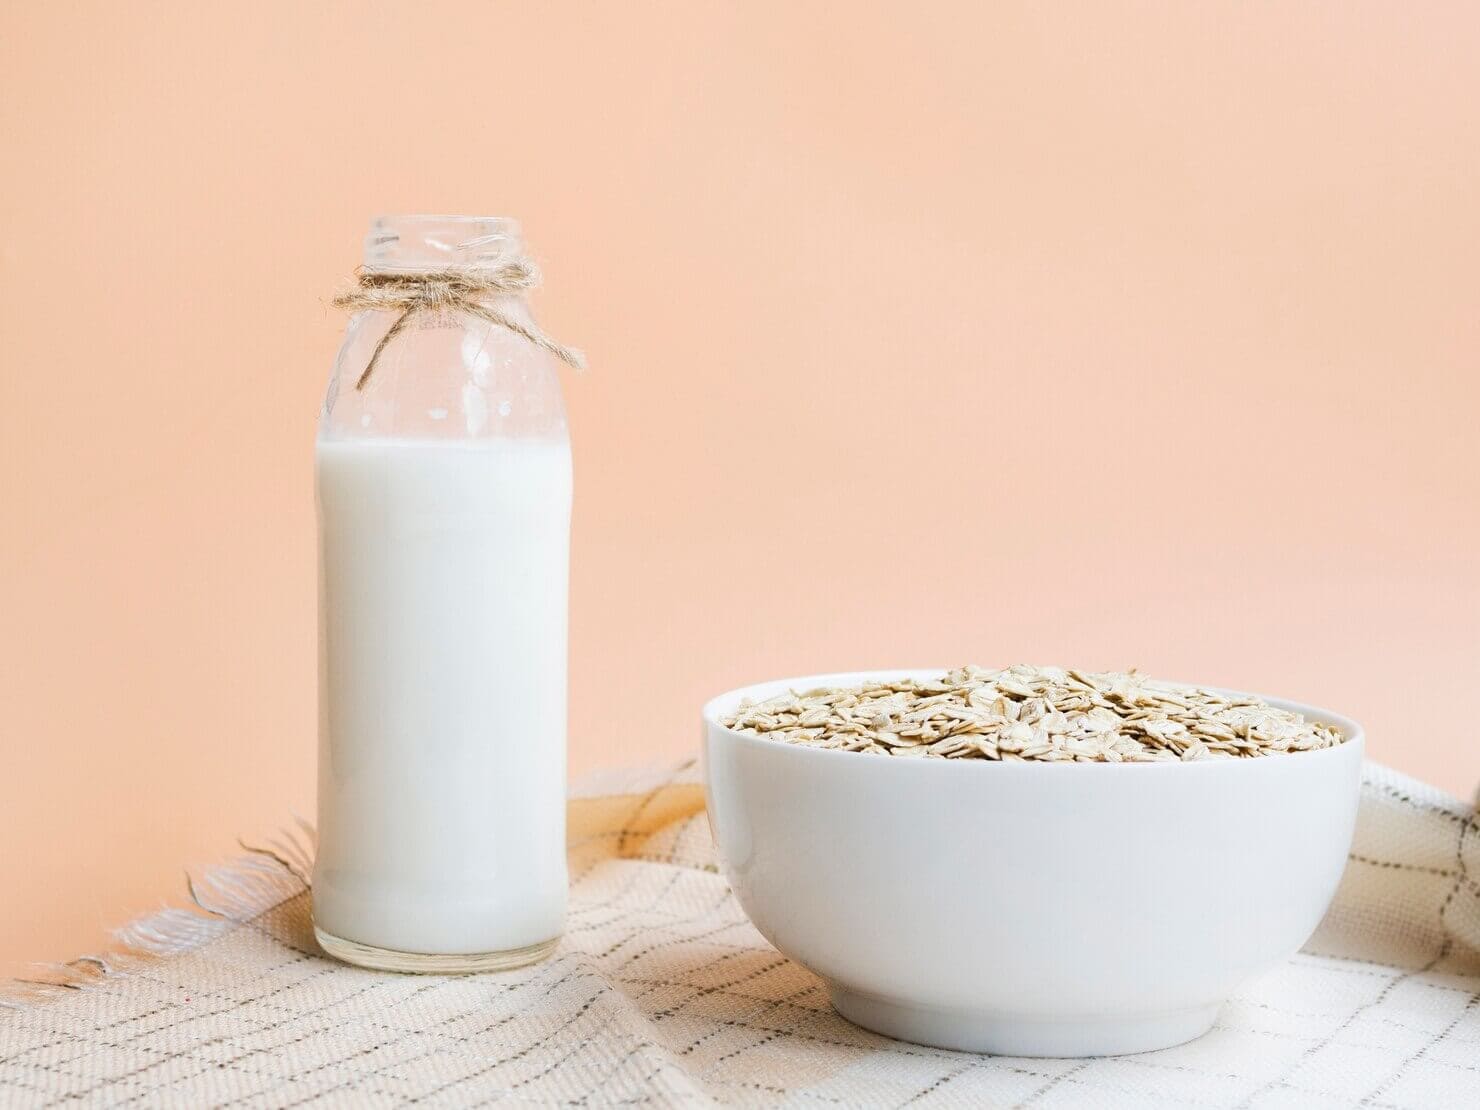 Bottle of oat milk next to a bowl of oats